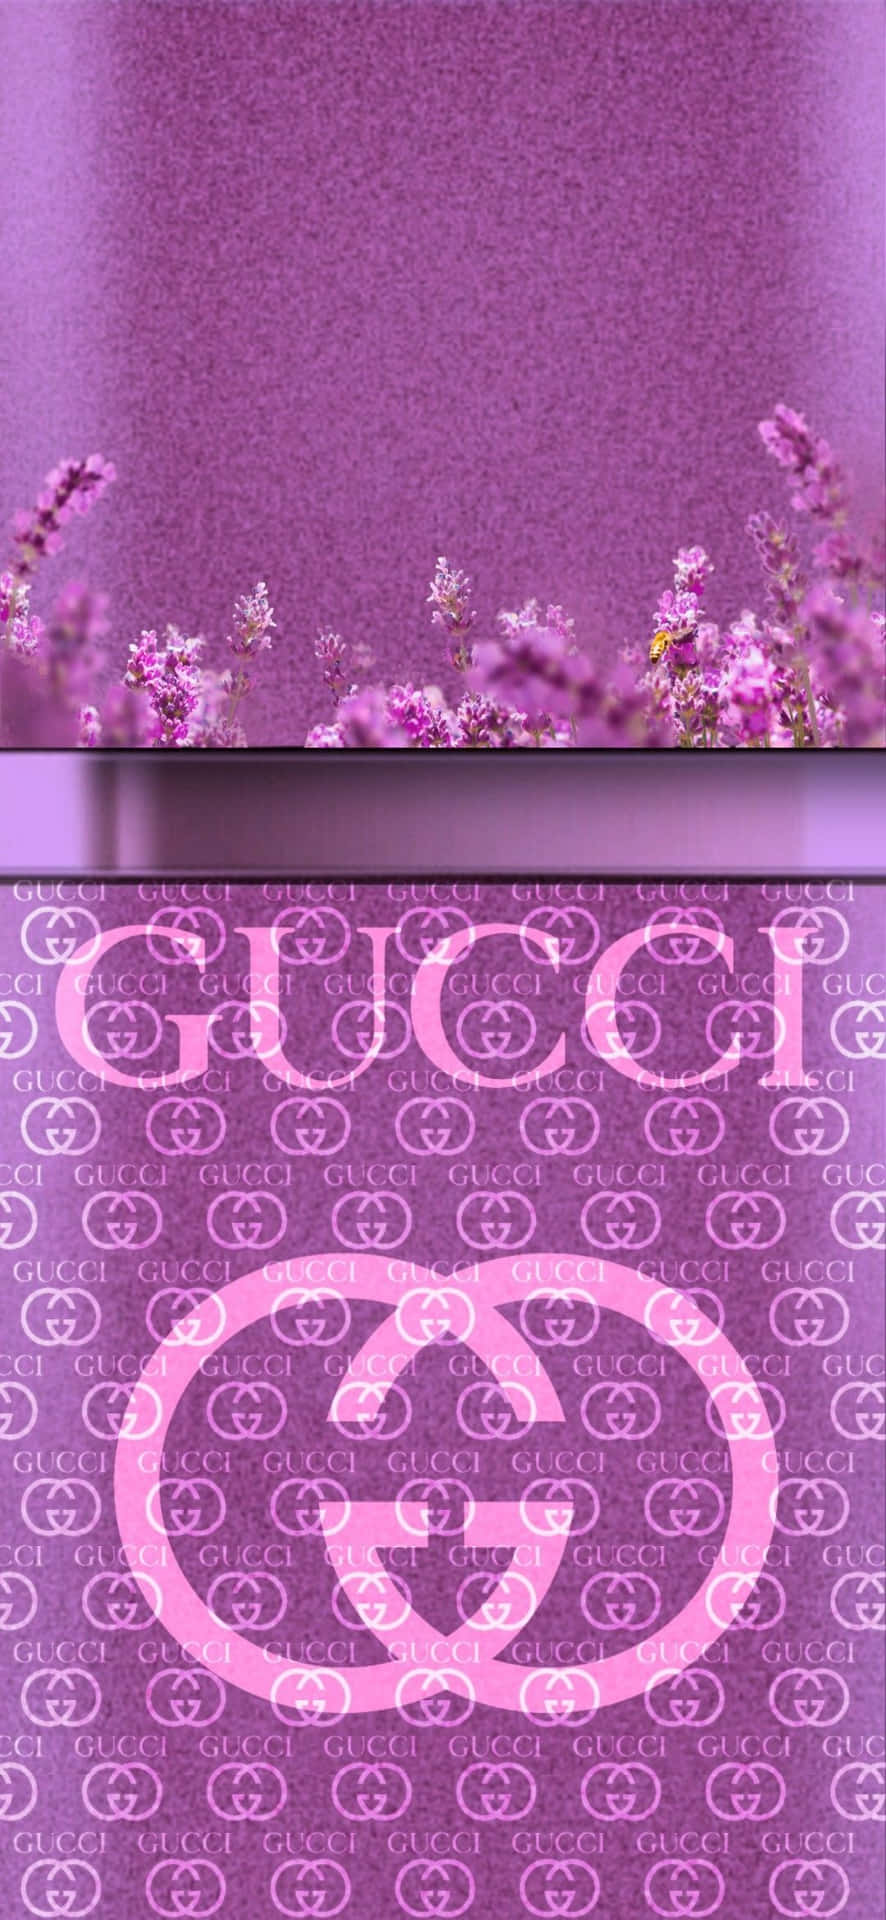 Louis Vuitton, Chanel, Gucci Wallpapers For iPhone